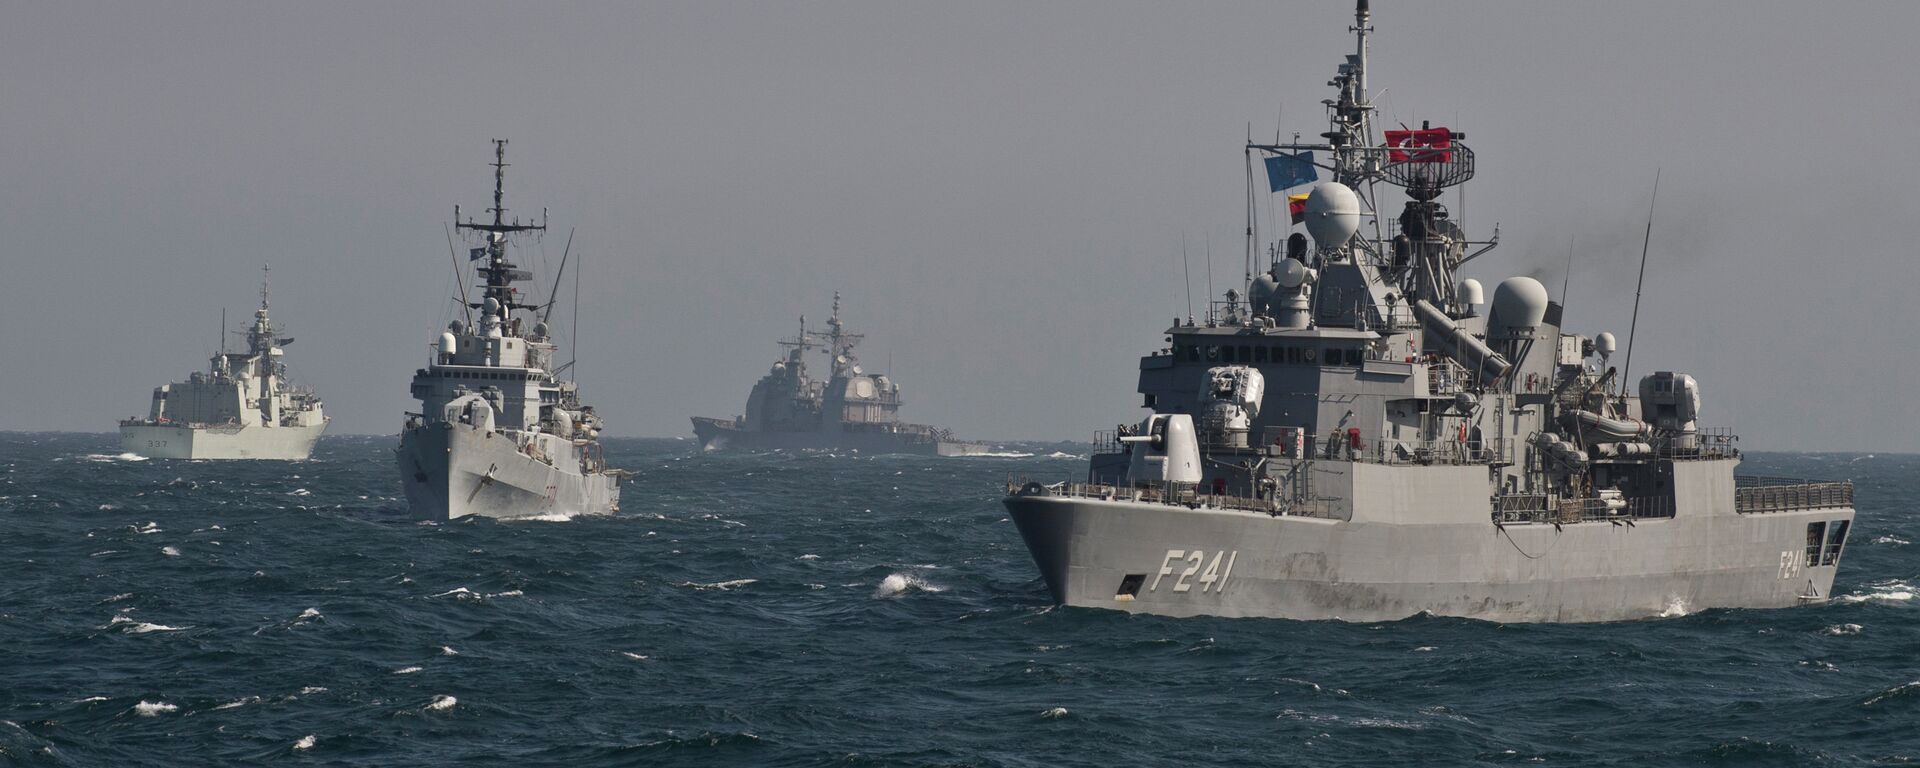 War ships of  NATO take part in a military drill on the Black Sea - Sputnik International, 1920, 30.04.2022